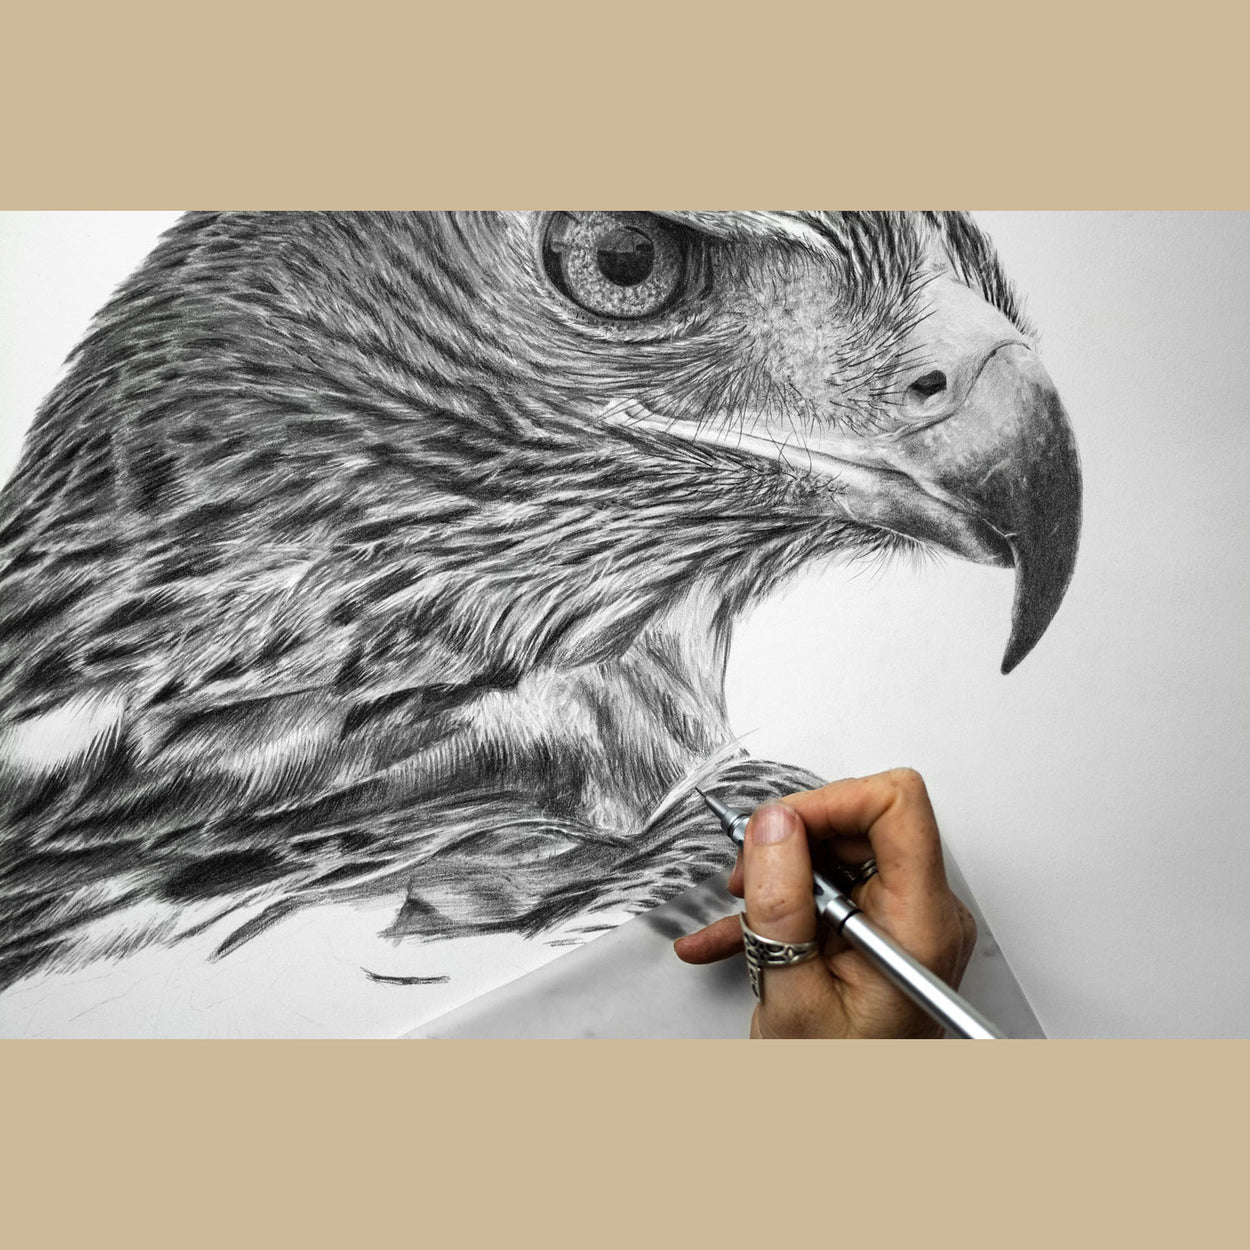 Golden Eagle Drawing in Progress - The Thriving Wild